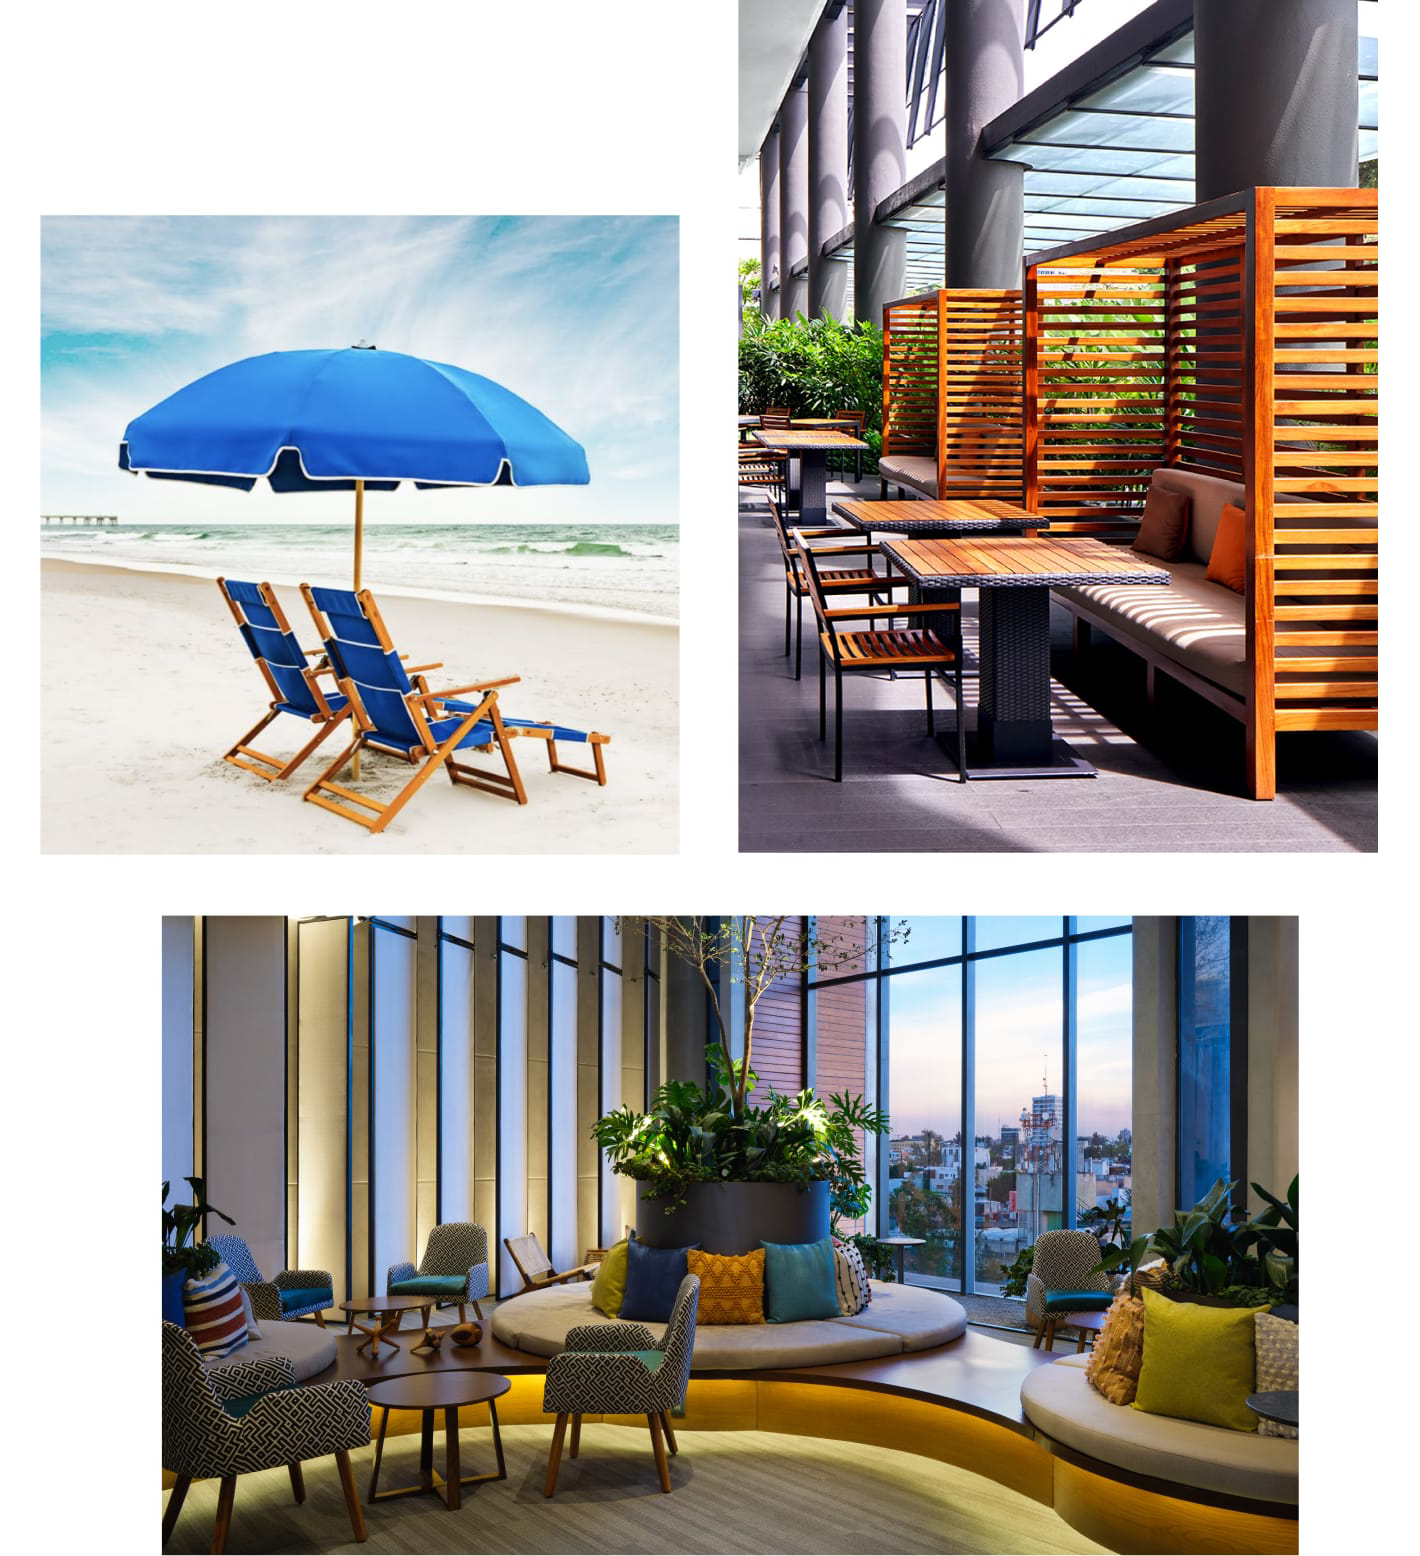 Cluster of images featuring an upscale hotel lounge, a sunny restaurant patio, and private beach seating